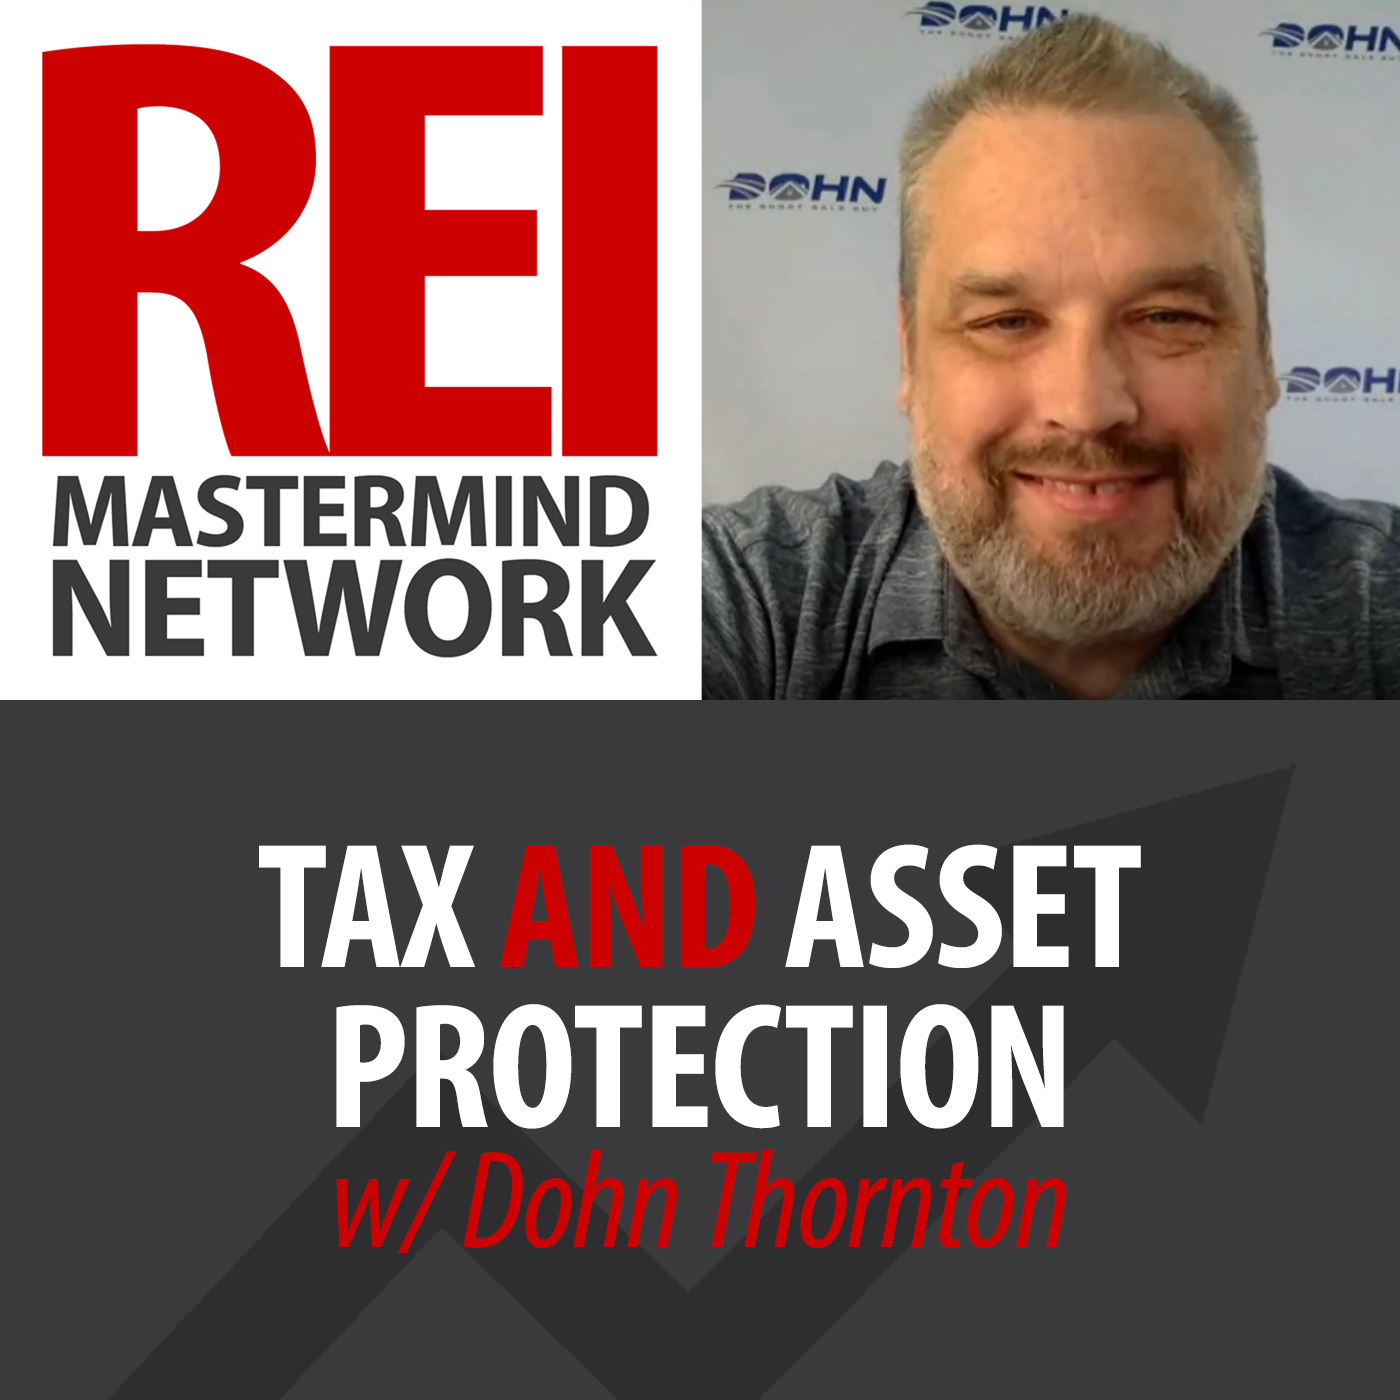 Tax AND Asset Protection with Dohn Thornton Image